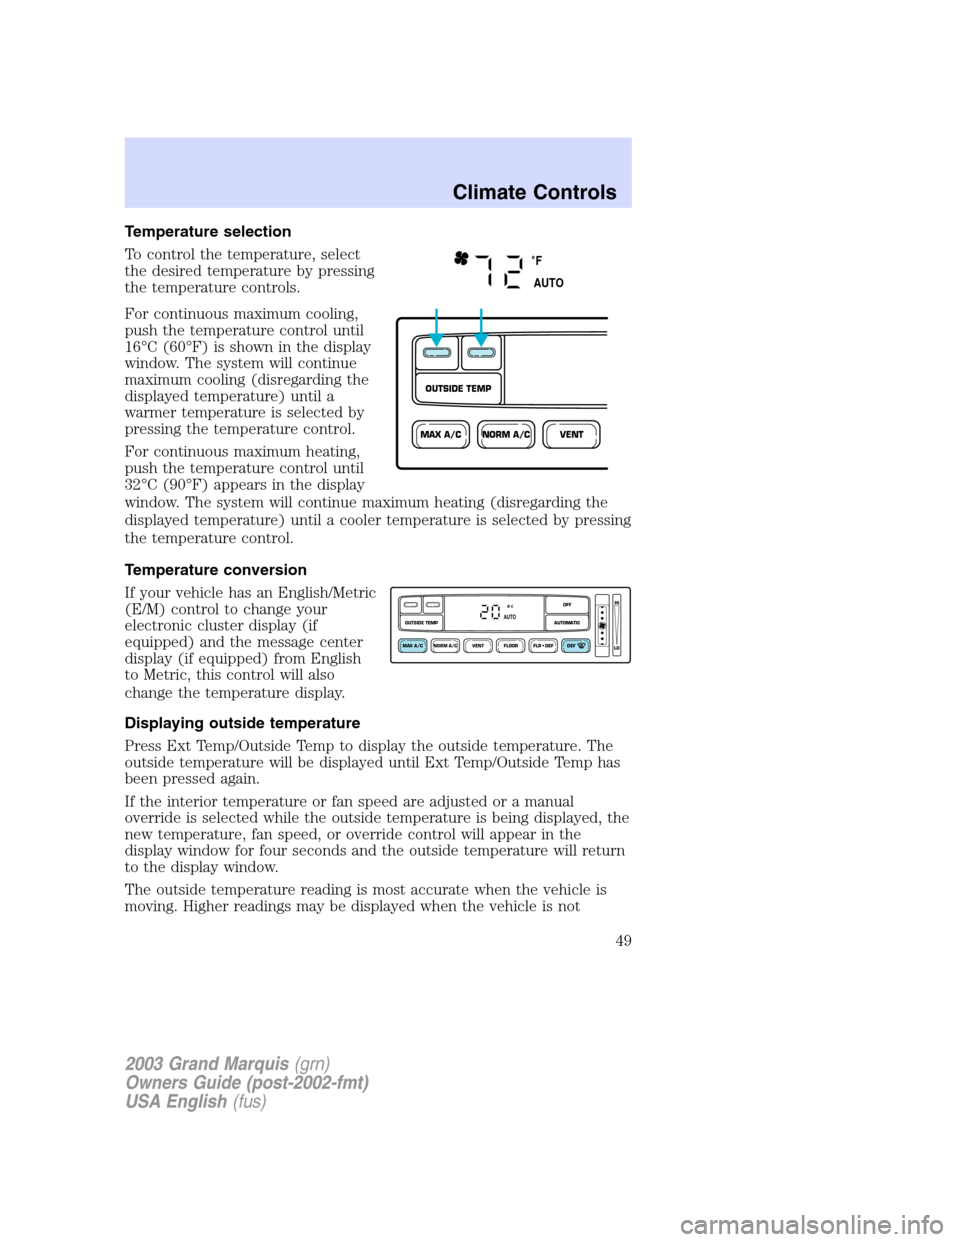 Mercury Grand Marquis 2003  s Service Manual Temperature selection
To control the temperature, select
the desired temperature by pressing
the temperature controls.
For continuous maximum cooling,
push the temperature control until
16°C (60°F) 